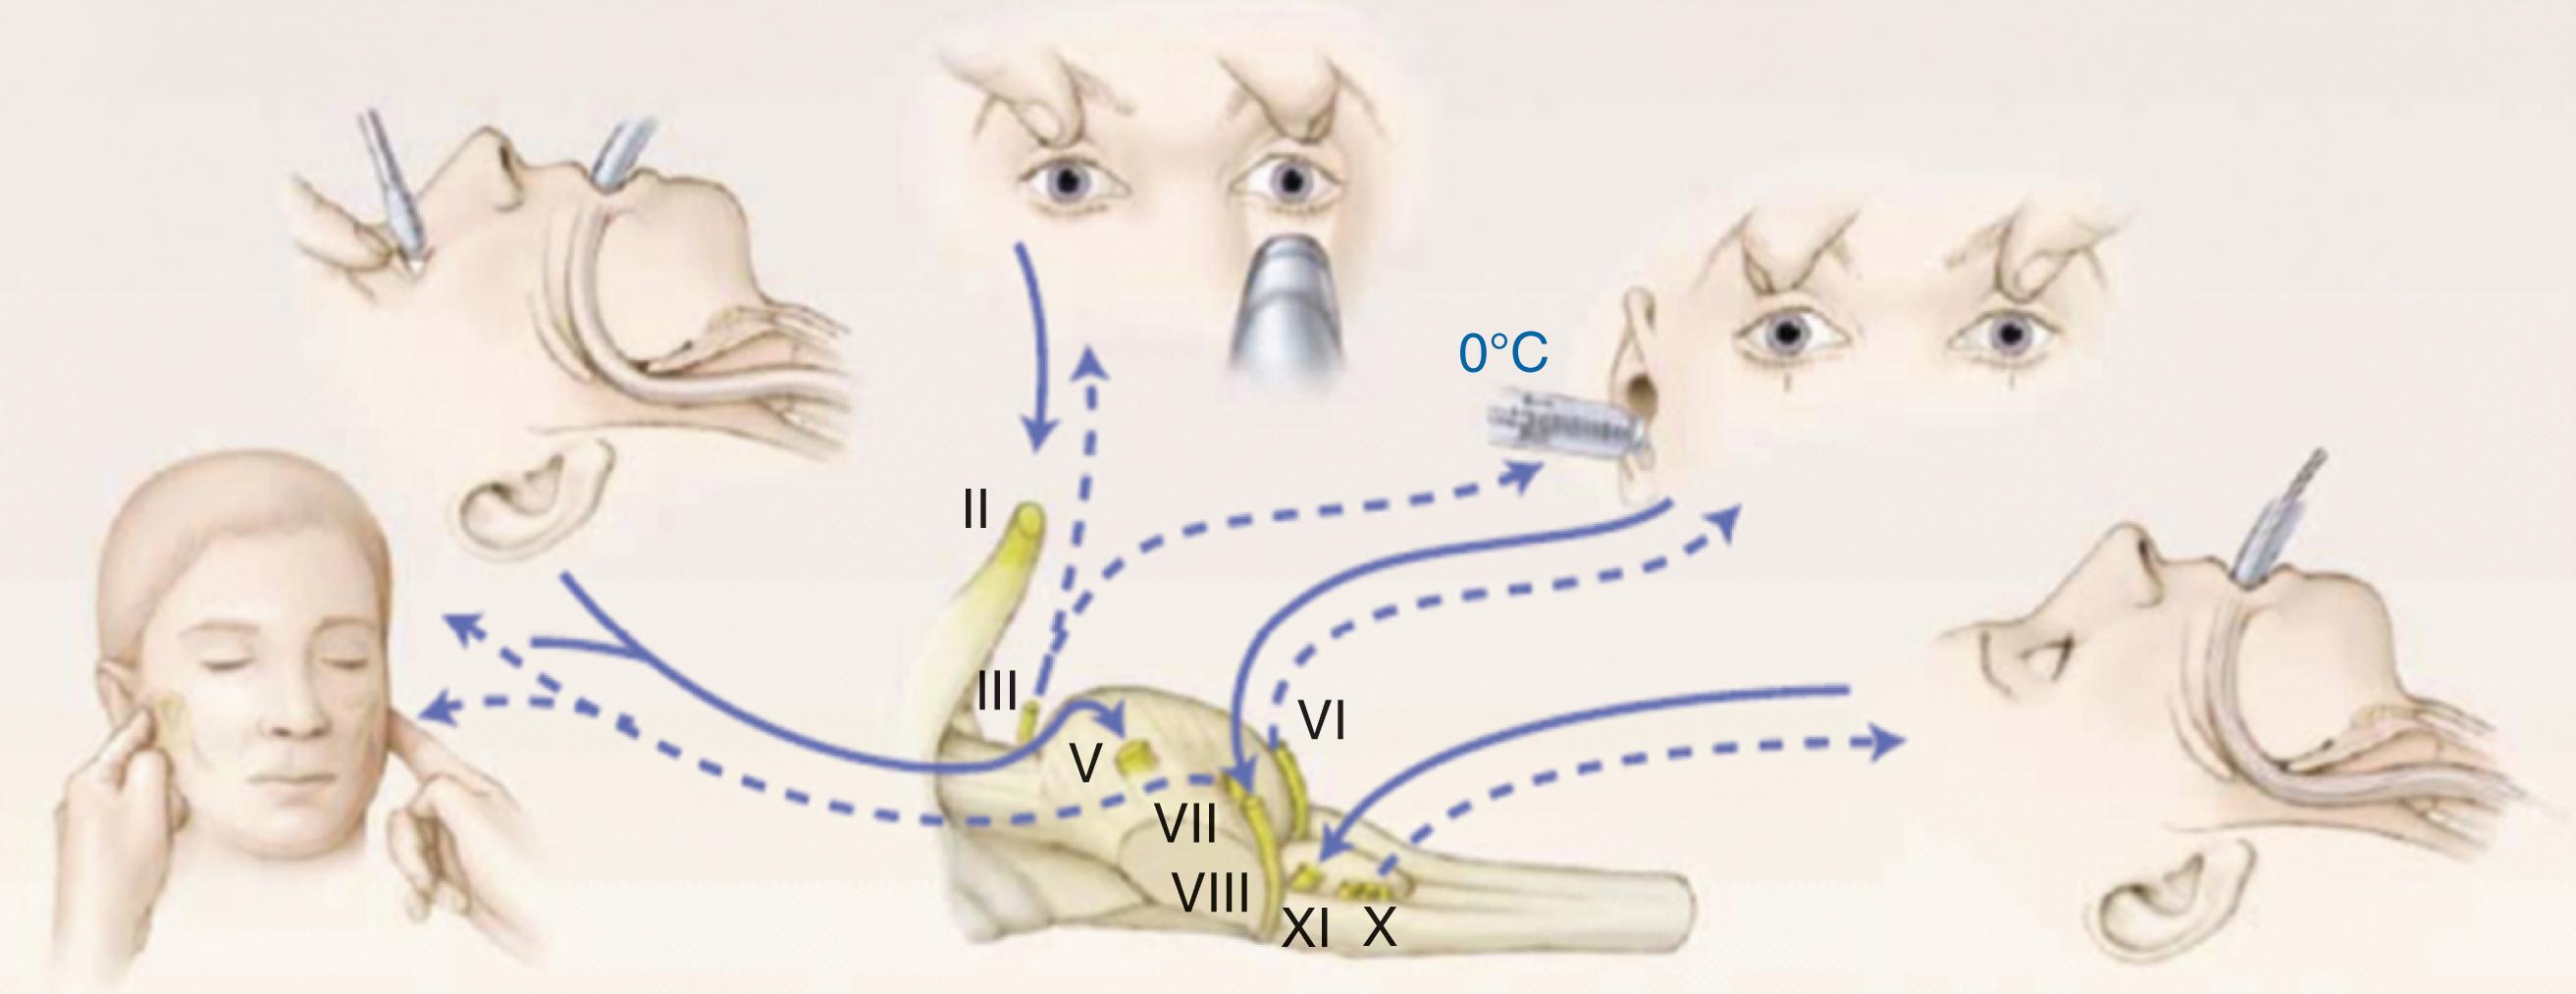 FIGURE 2, The steps in a clinical examination to assess brain stem reflexes. The tested cranial nerves are indicated by Roman numerals, the solid arrows represent afferent limbs, and the broken arrows, efferent limbs. Depicted are the absence of grimacing or eye opening with deep pressure on both condyles at the level of the temporomandibular joint (afferent nerve V and efferent nerve VII), the absent corneal reflex elicited by touching the edge of the cornea (V and VII), the absent light reflex (II and III), the absent oculovestibular response toward the side of the cold stimulus provided by ice water (pen marks at the level of the pupils can be used as reference) (VIII and III and VI), and the absent cough reflex elicited through the introduction of a suction catheter deep in the trachea (IX and X).